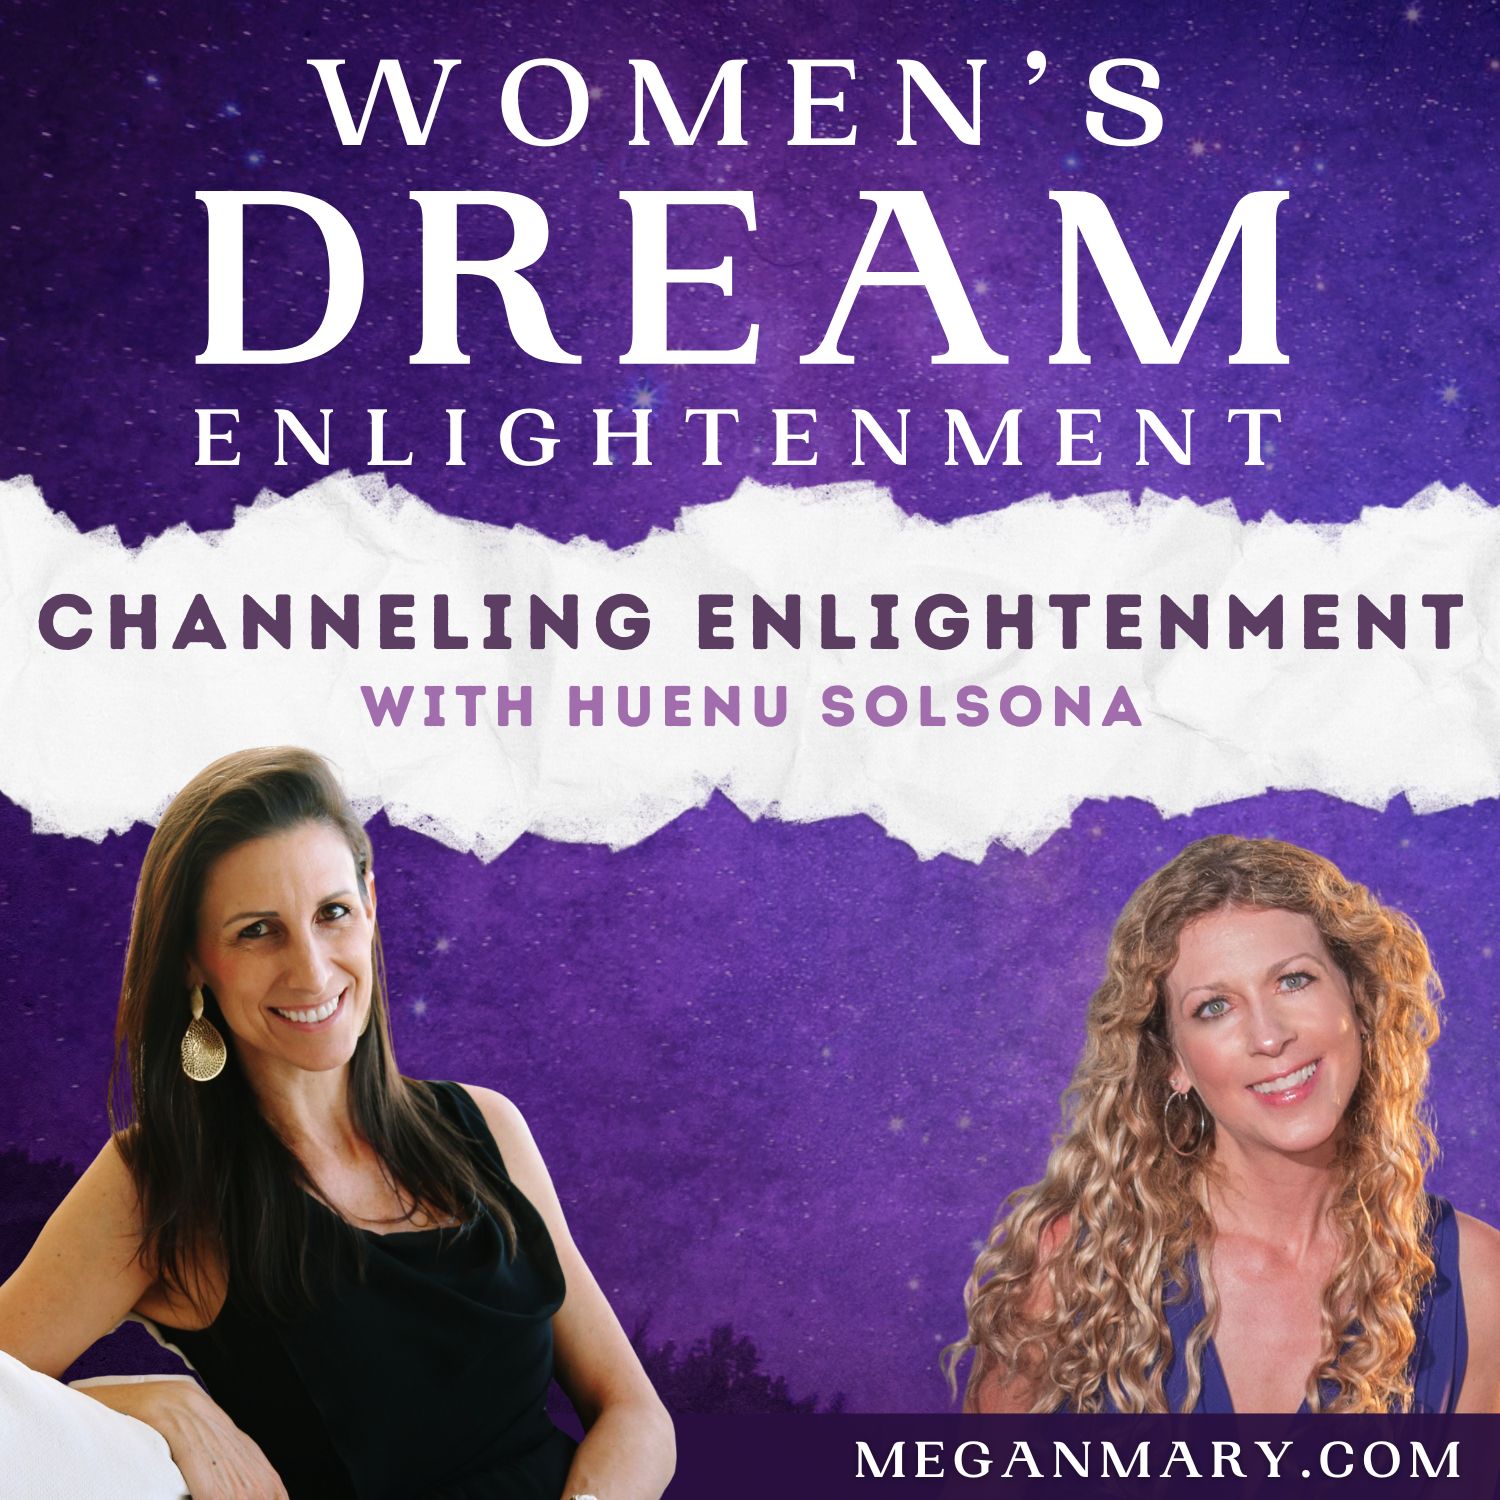 Channeling Enlightenment: Journeying Through Dreams and Authenticity with Huenu Solsona